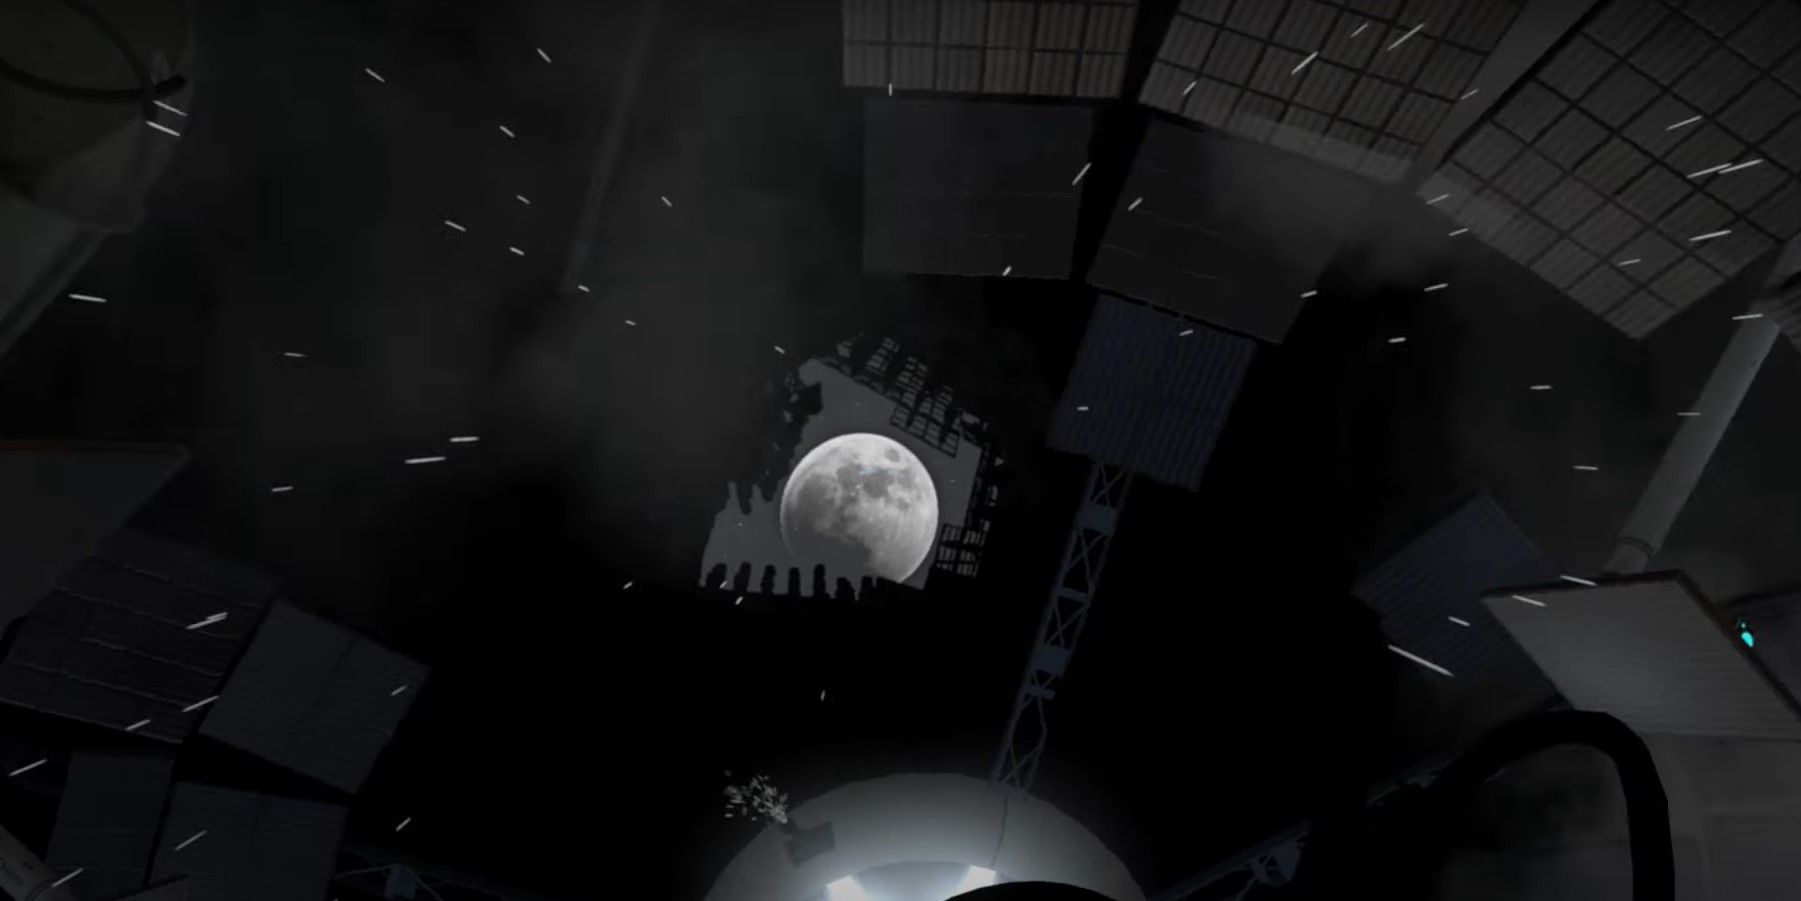 The Moon seen from Wheatley's chamber at the end of Portal 2